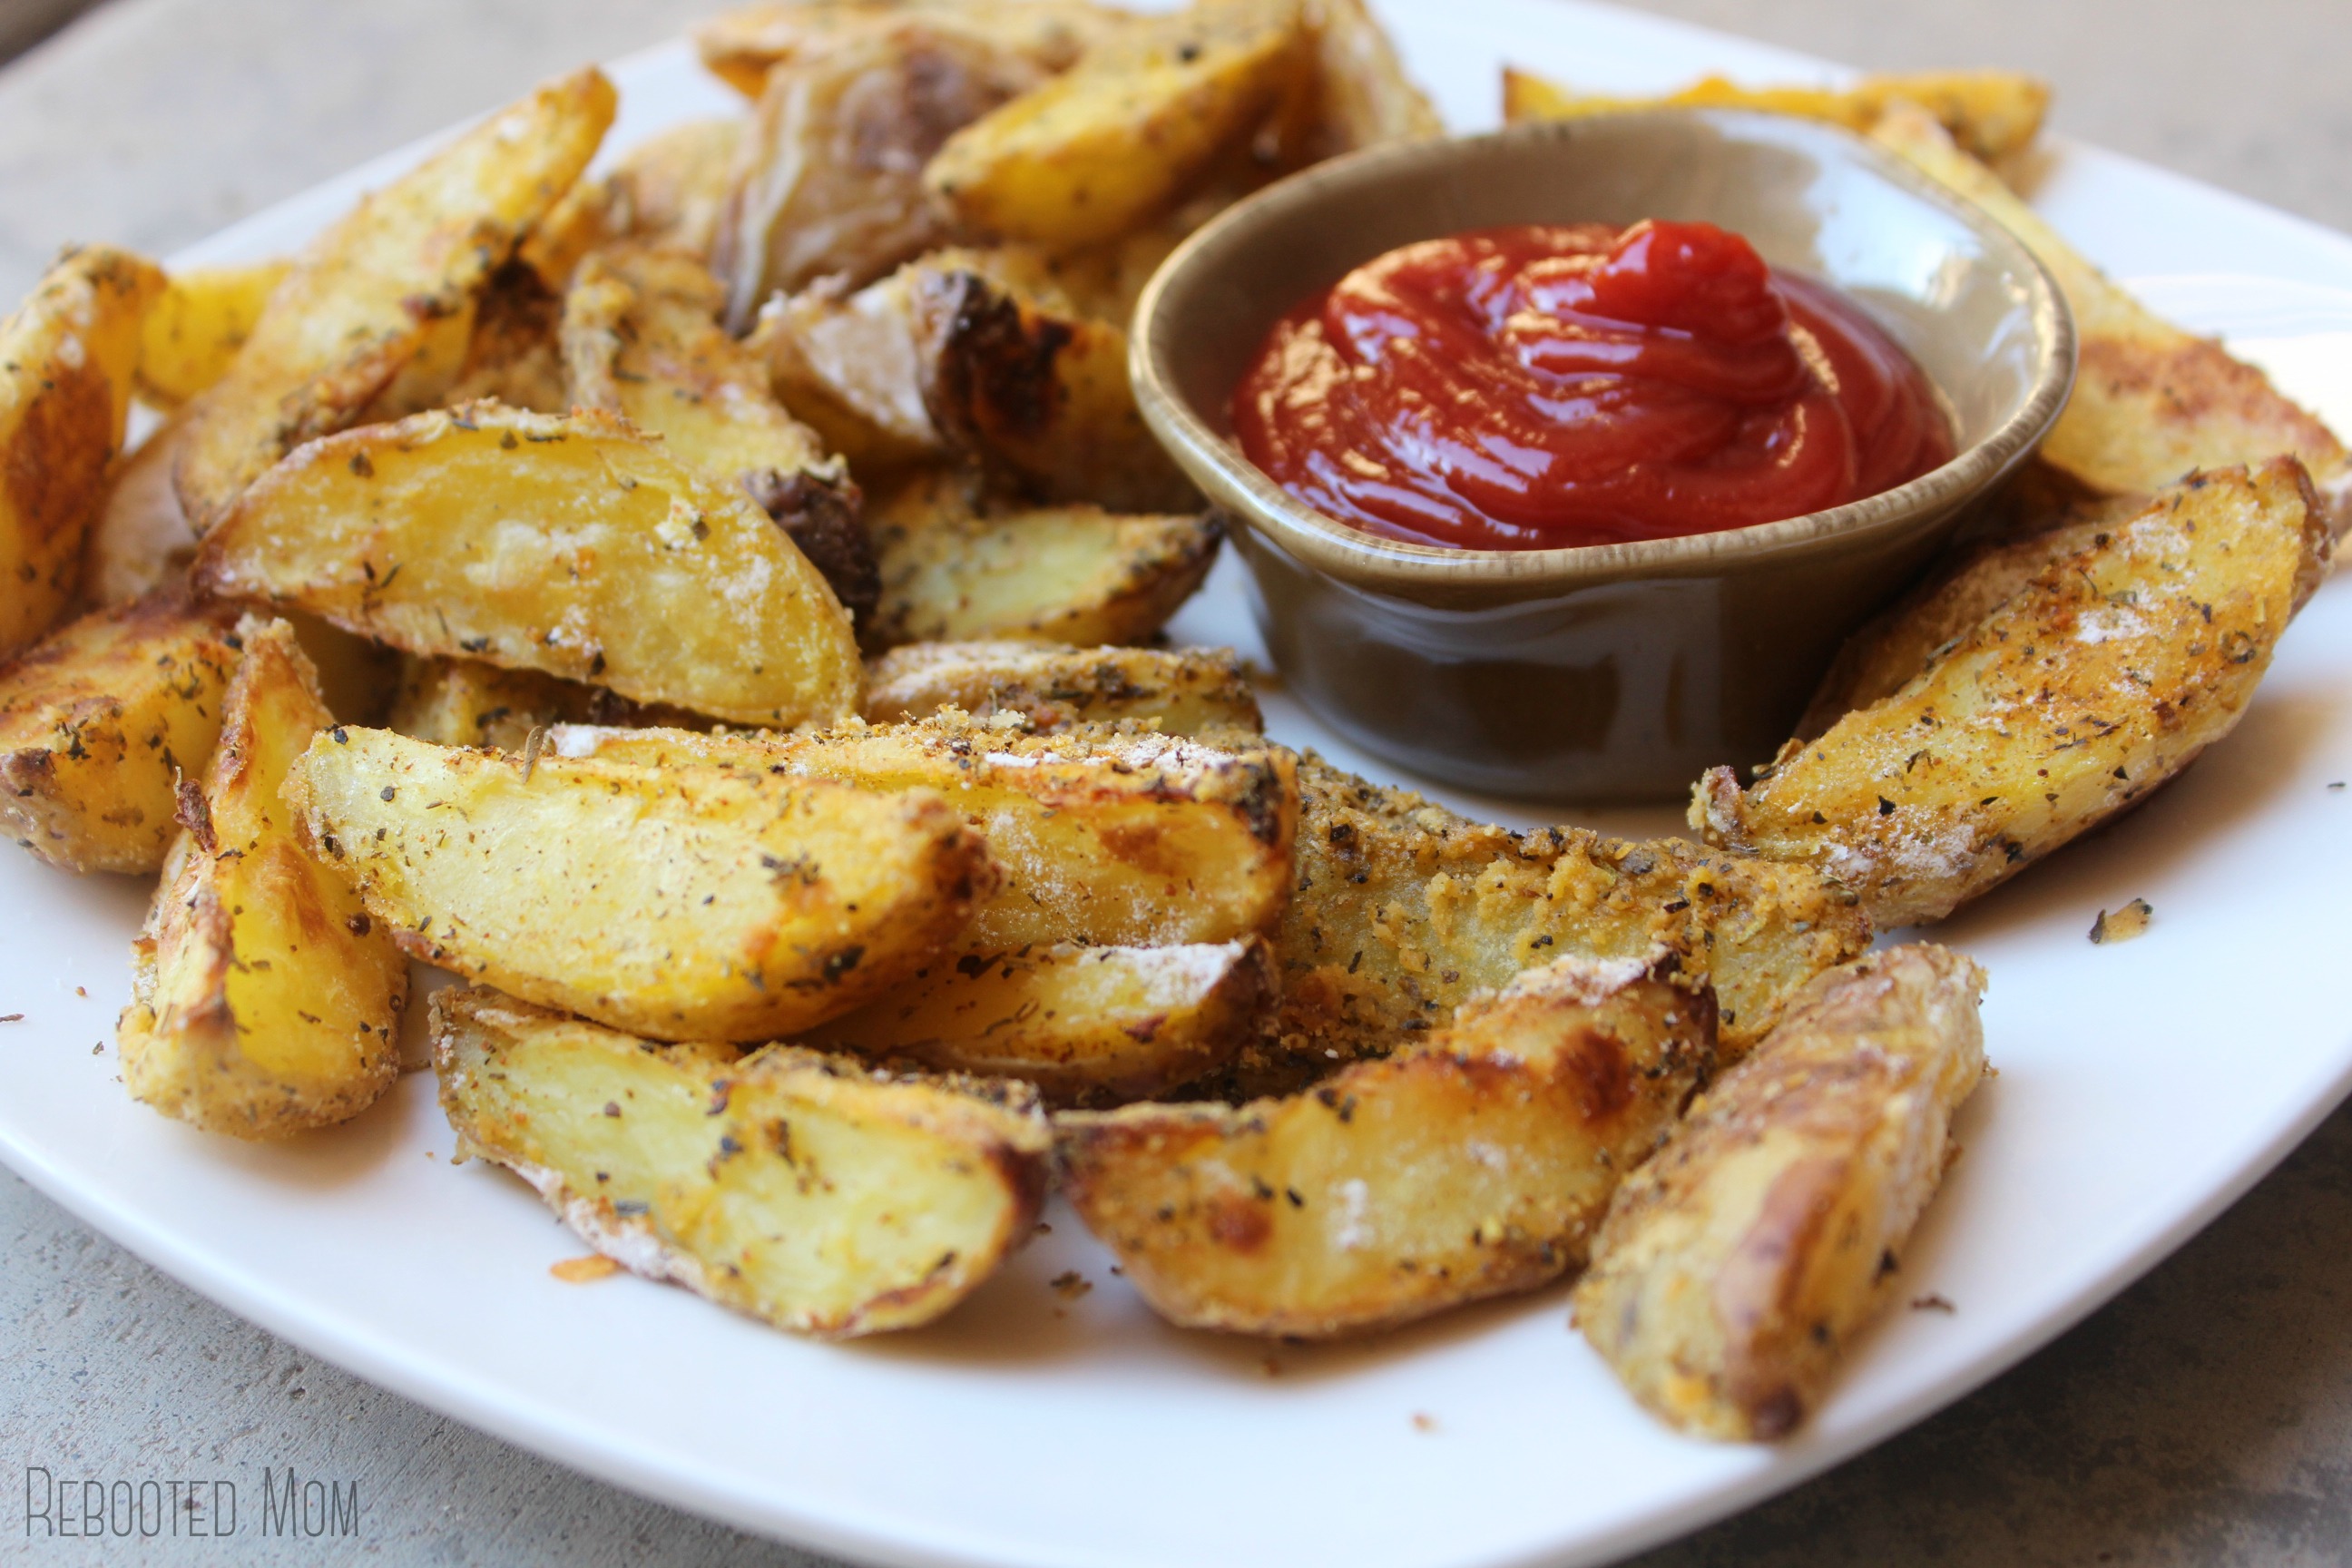 Oven baked potato wedges that are coated in seasoned flour and baked in the oven to perfection! A healthier version of the Jo Jo Potato!